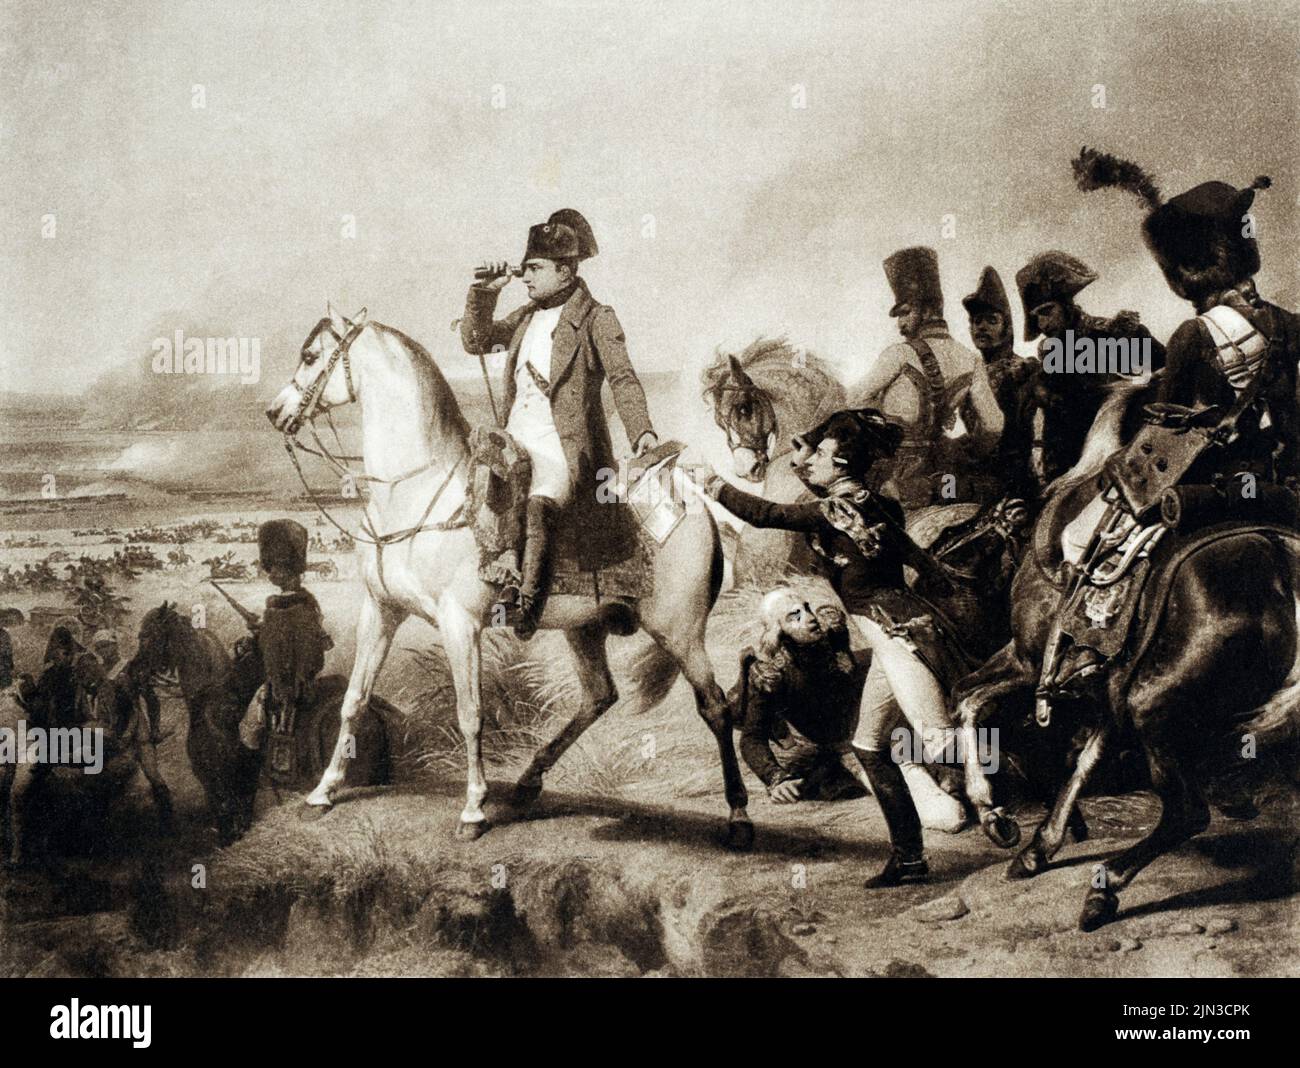 A black and white verson of Horace Vernets 'Battle of Wagram'. Mounted Napoleon gives orders during the Battle of Wagram (6th July 1809) where the French won a decisive victory over the Austrians. Taken from postcard c.1910s. Stock Photo